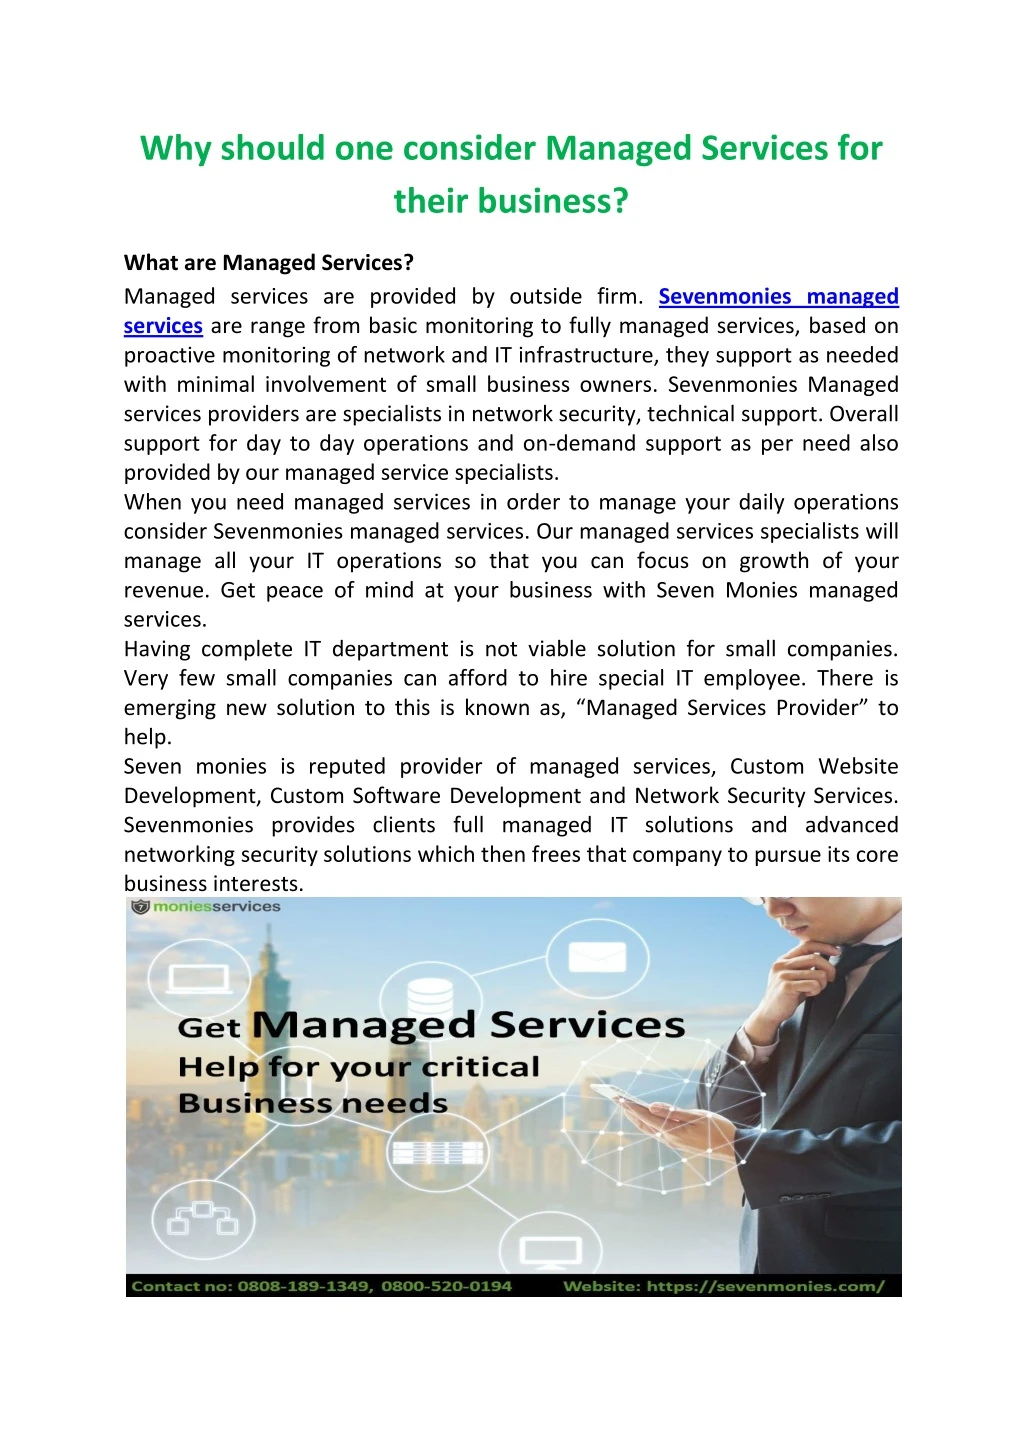 why should one consider managed services